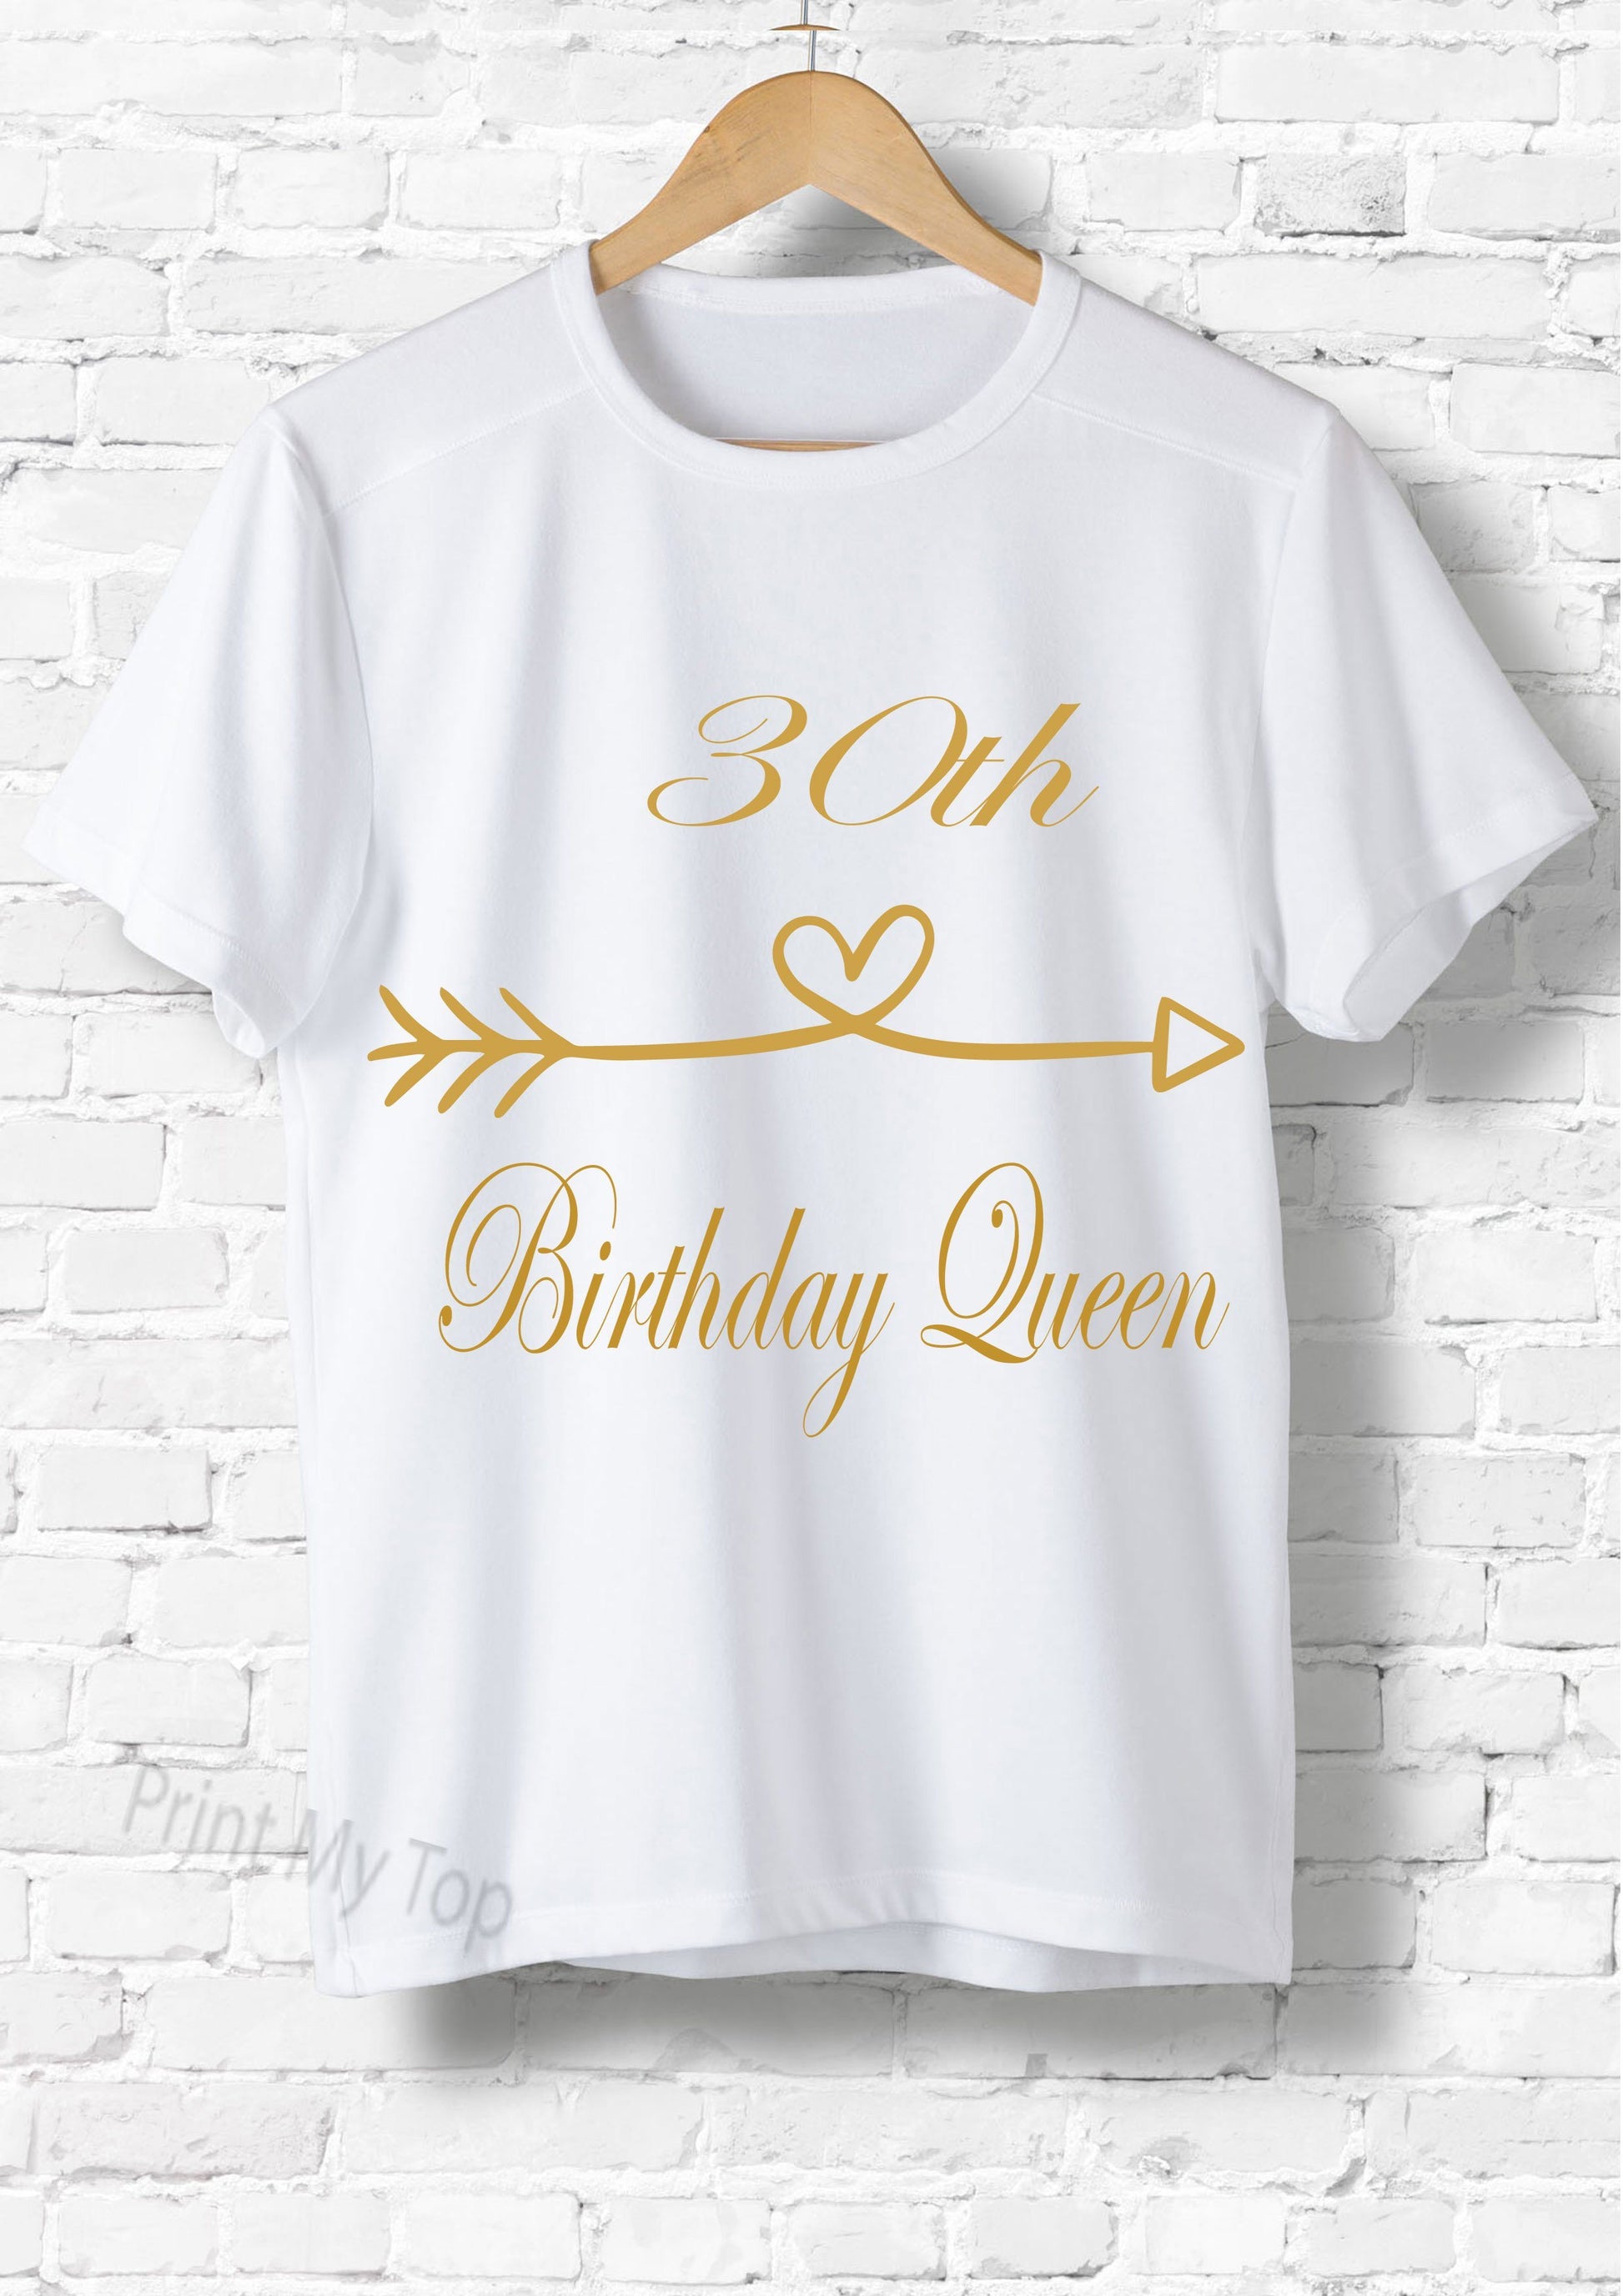 Personalised Birthday Squad and Queen T-shirts